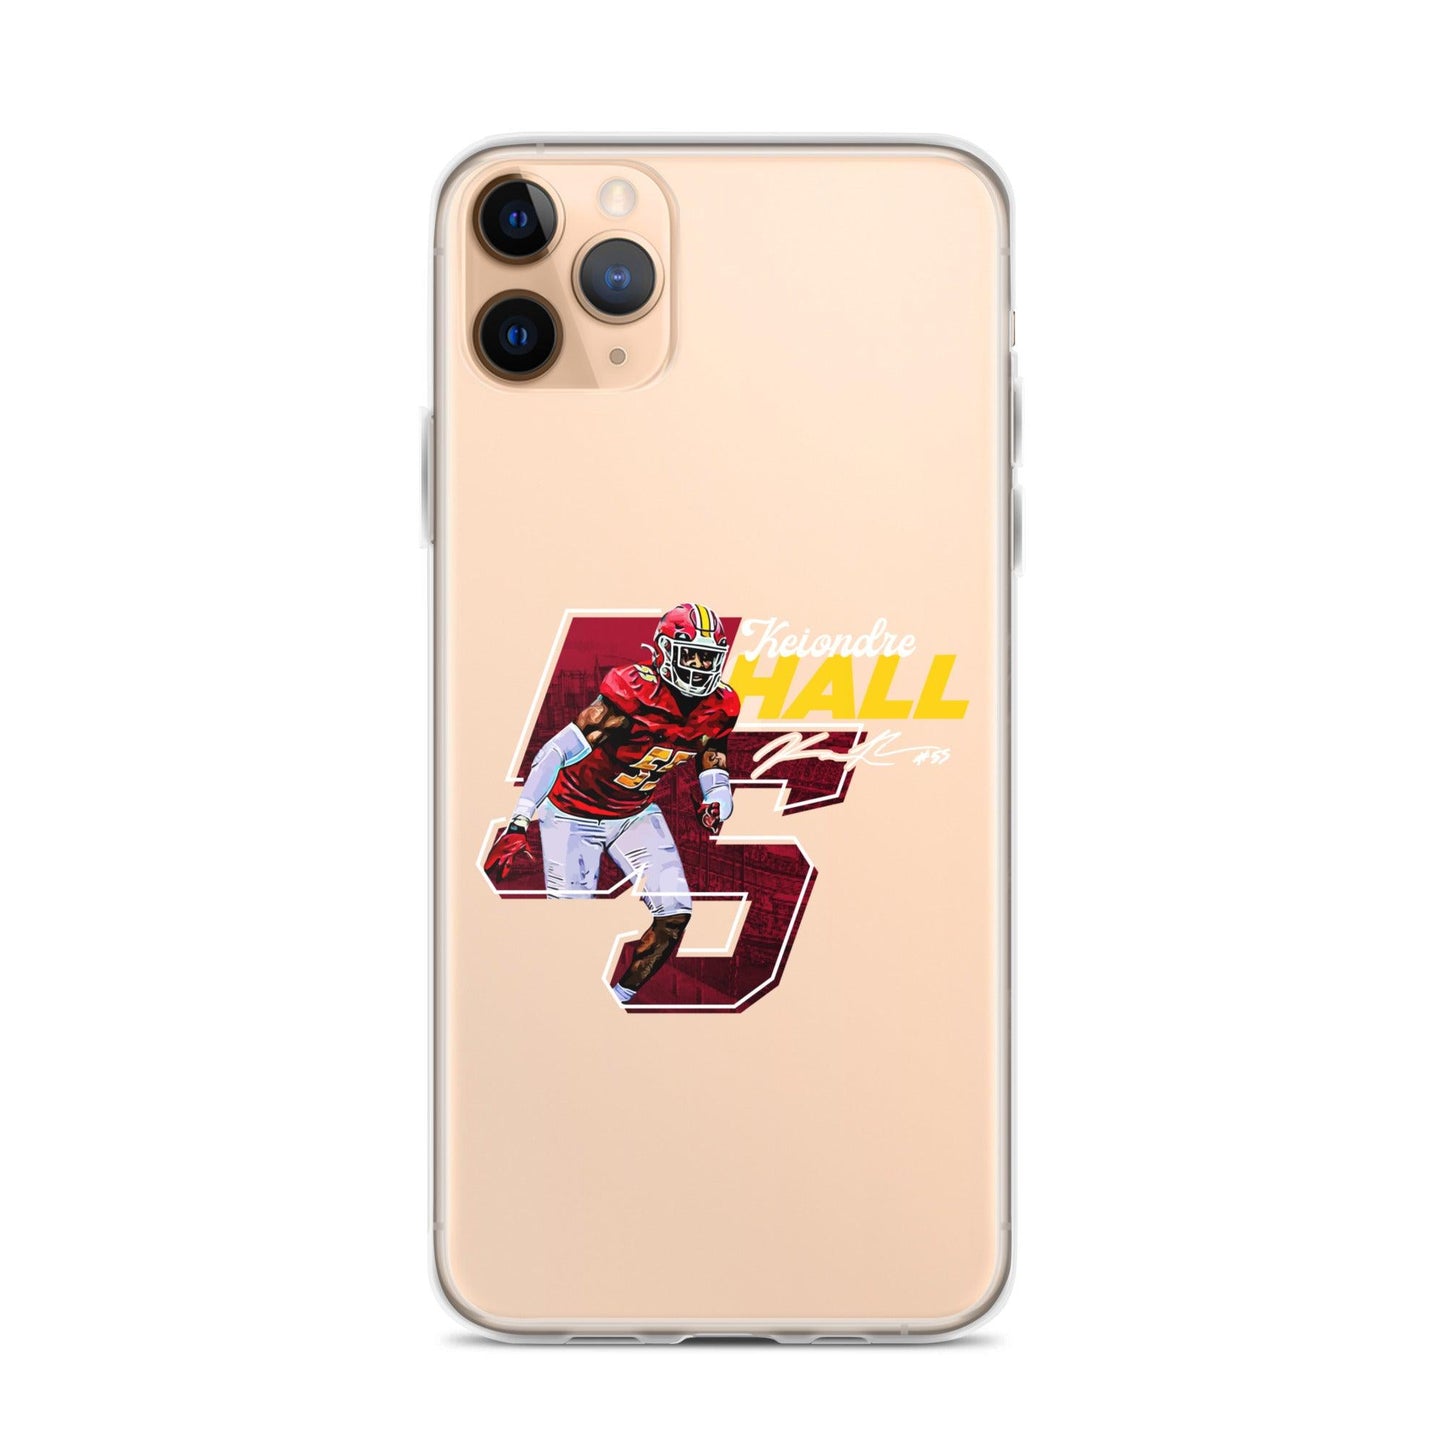 Keiondre Hall "Signature" iPhone Case - Fan Arch